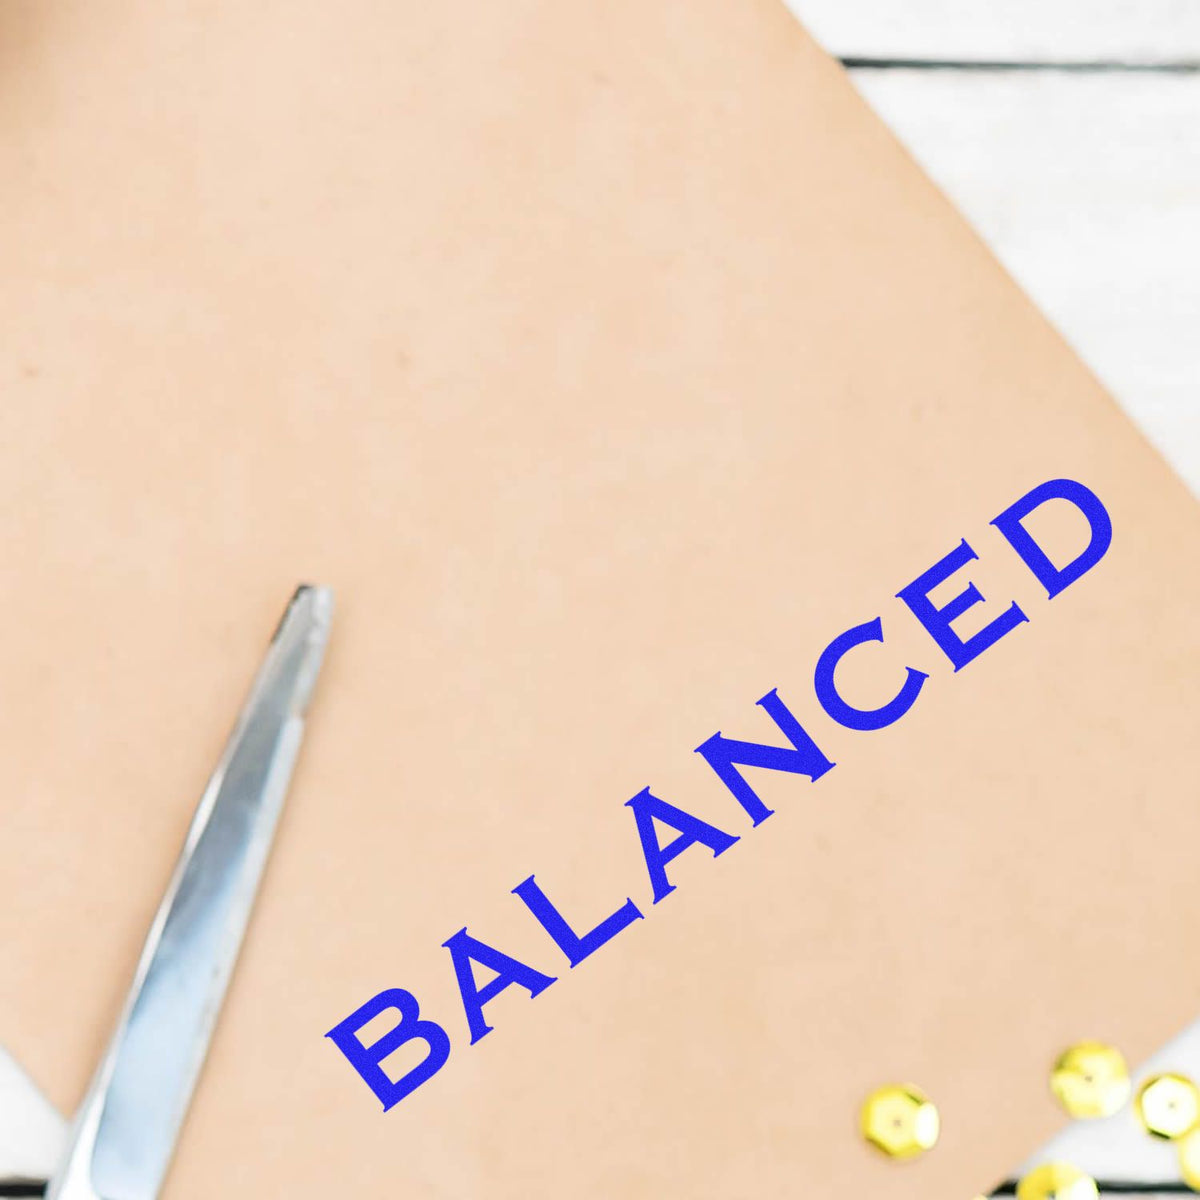 Balanced Rubber Stamp In Use Photo